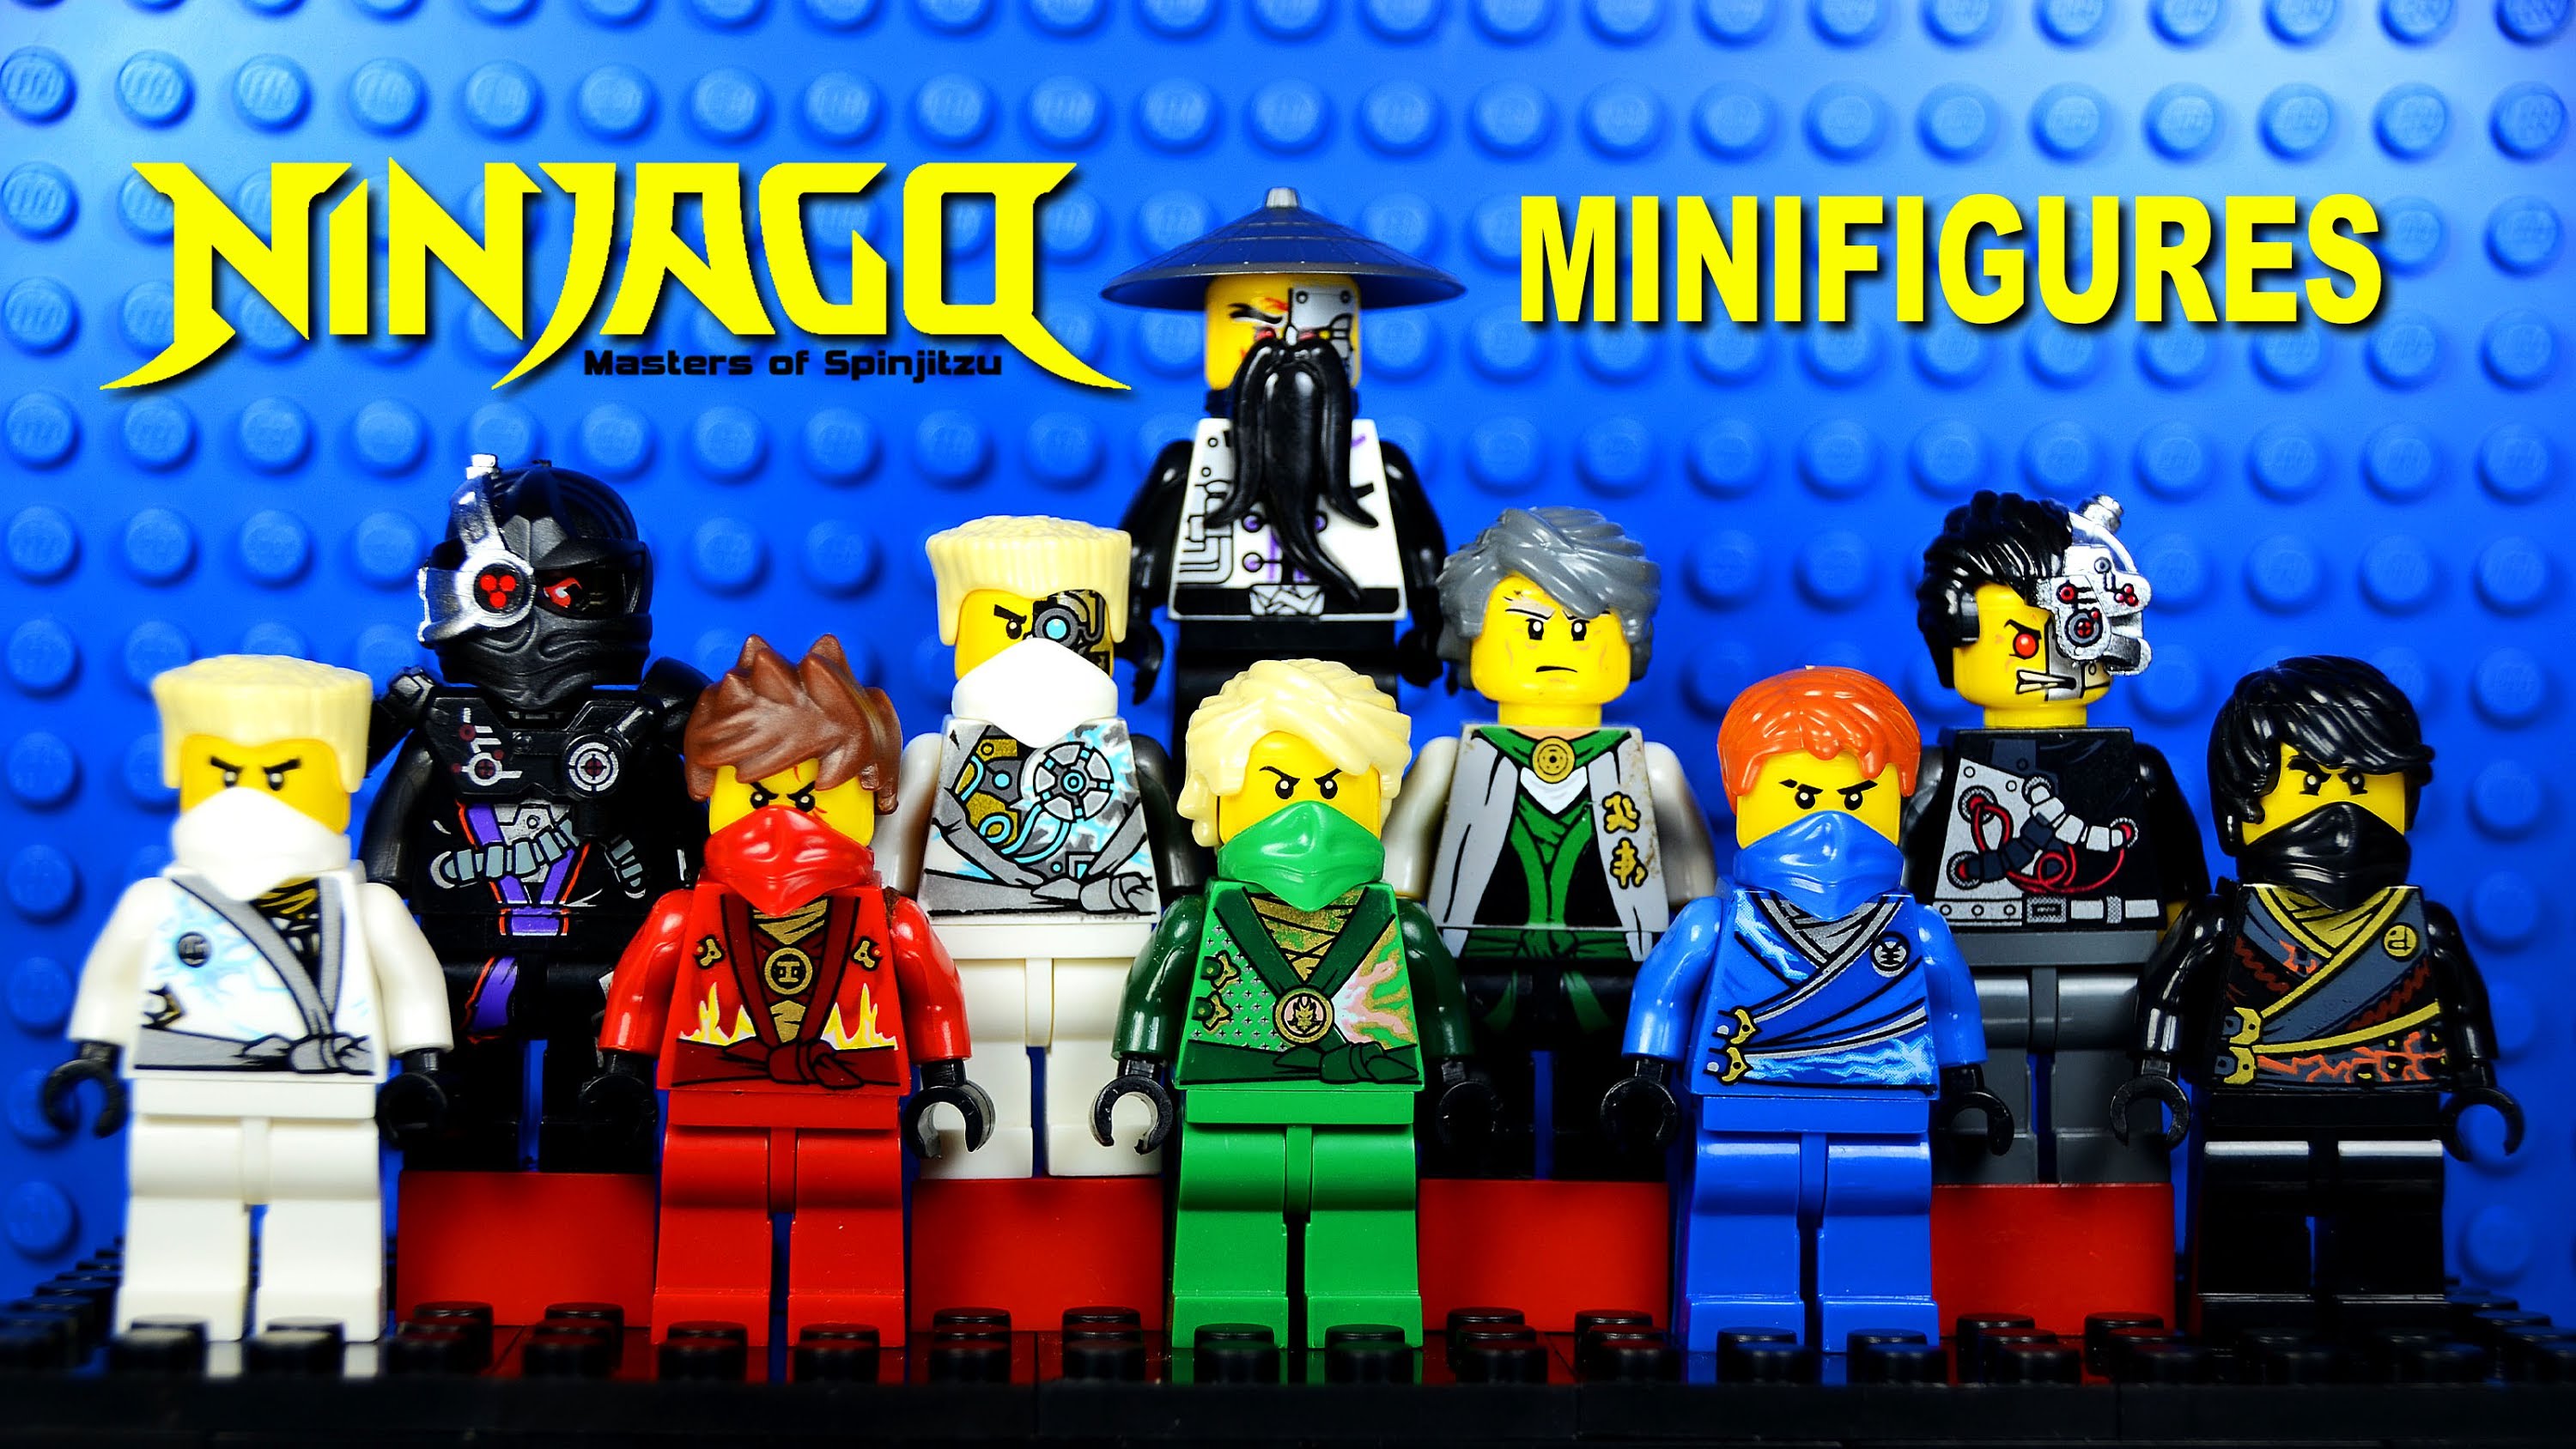 Lego Ninjago: Masters Of Spinjitzu Backgrounds, Compatible - PC, Mobile, Gadgets| 3000x1688 px